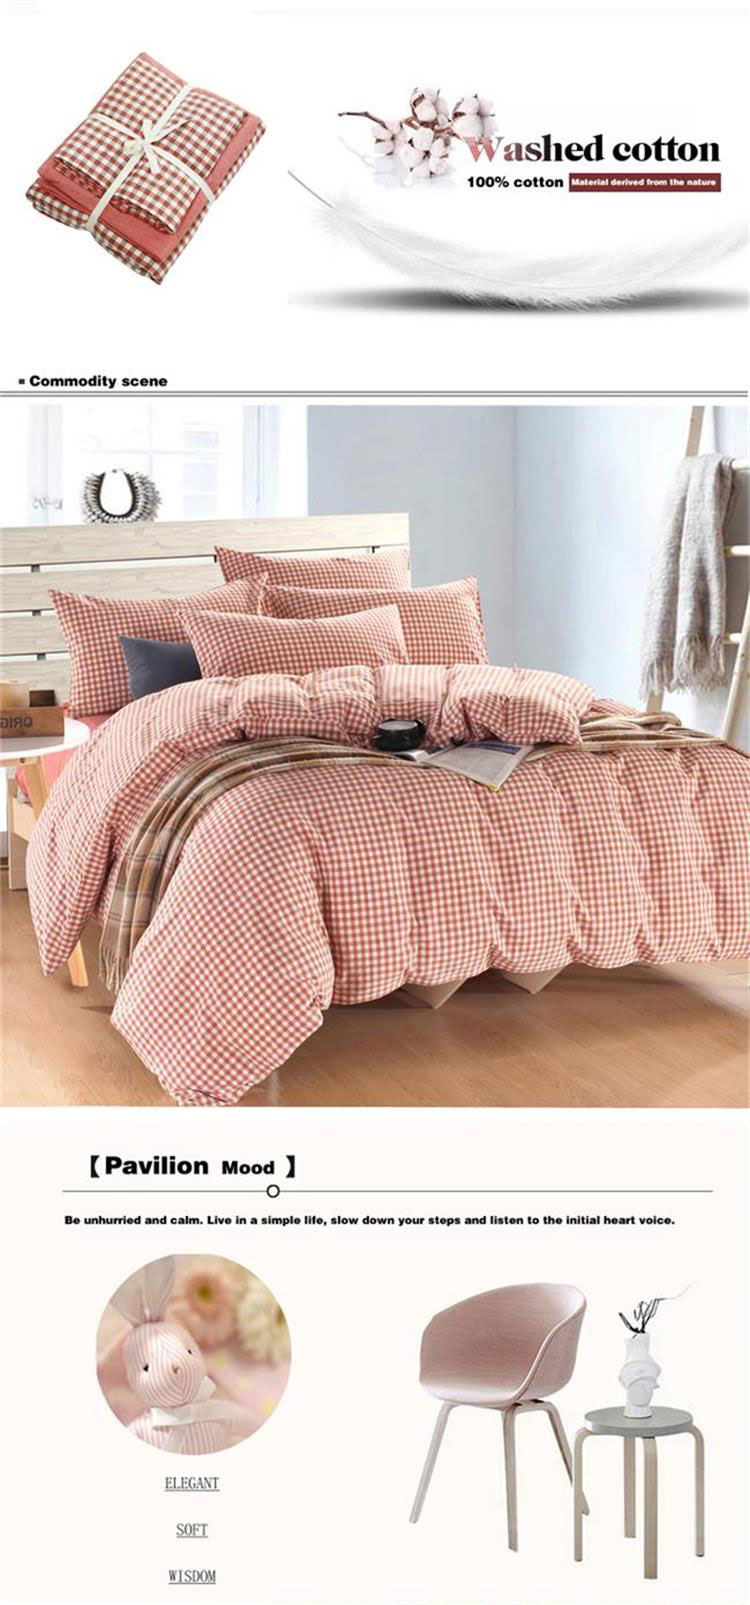 College King Size Bed Linen